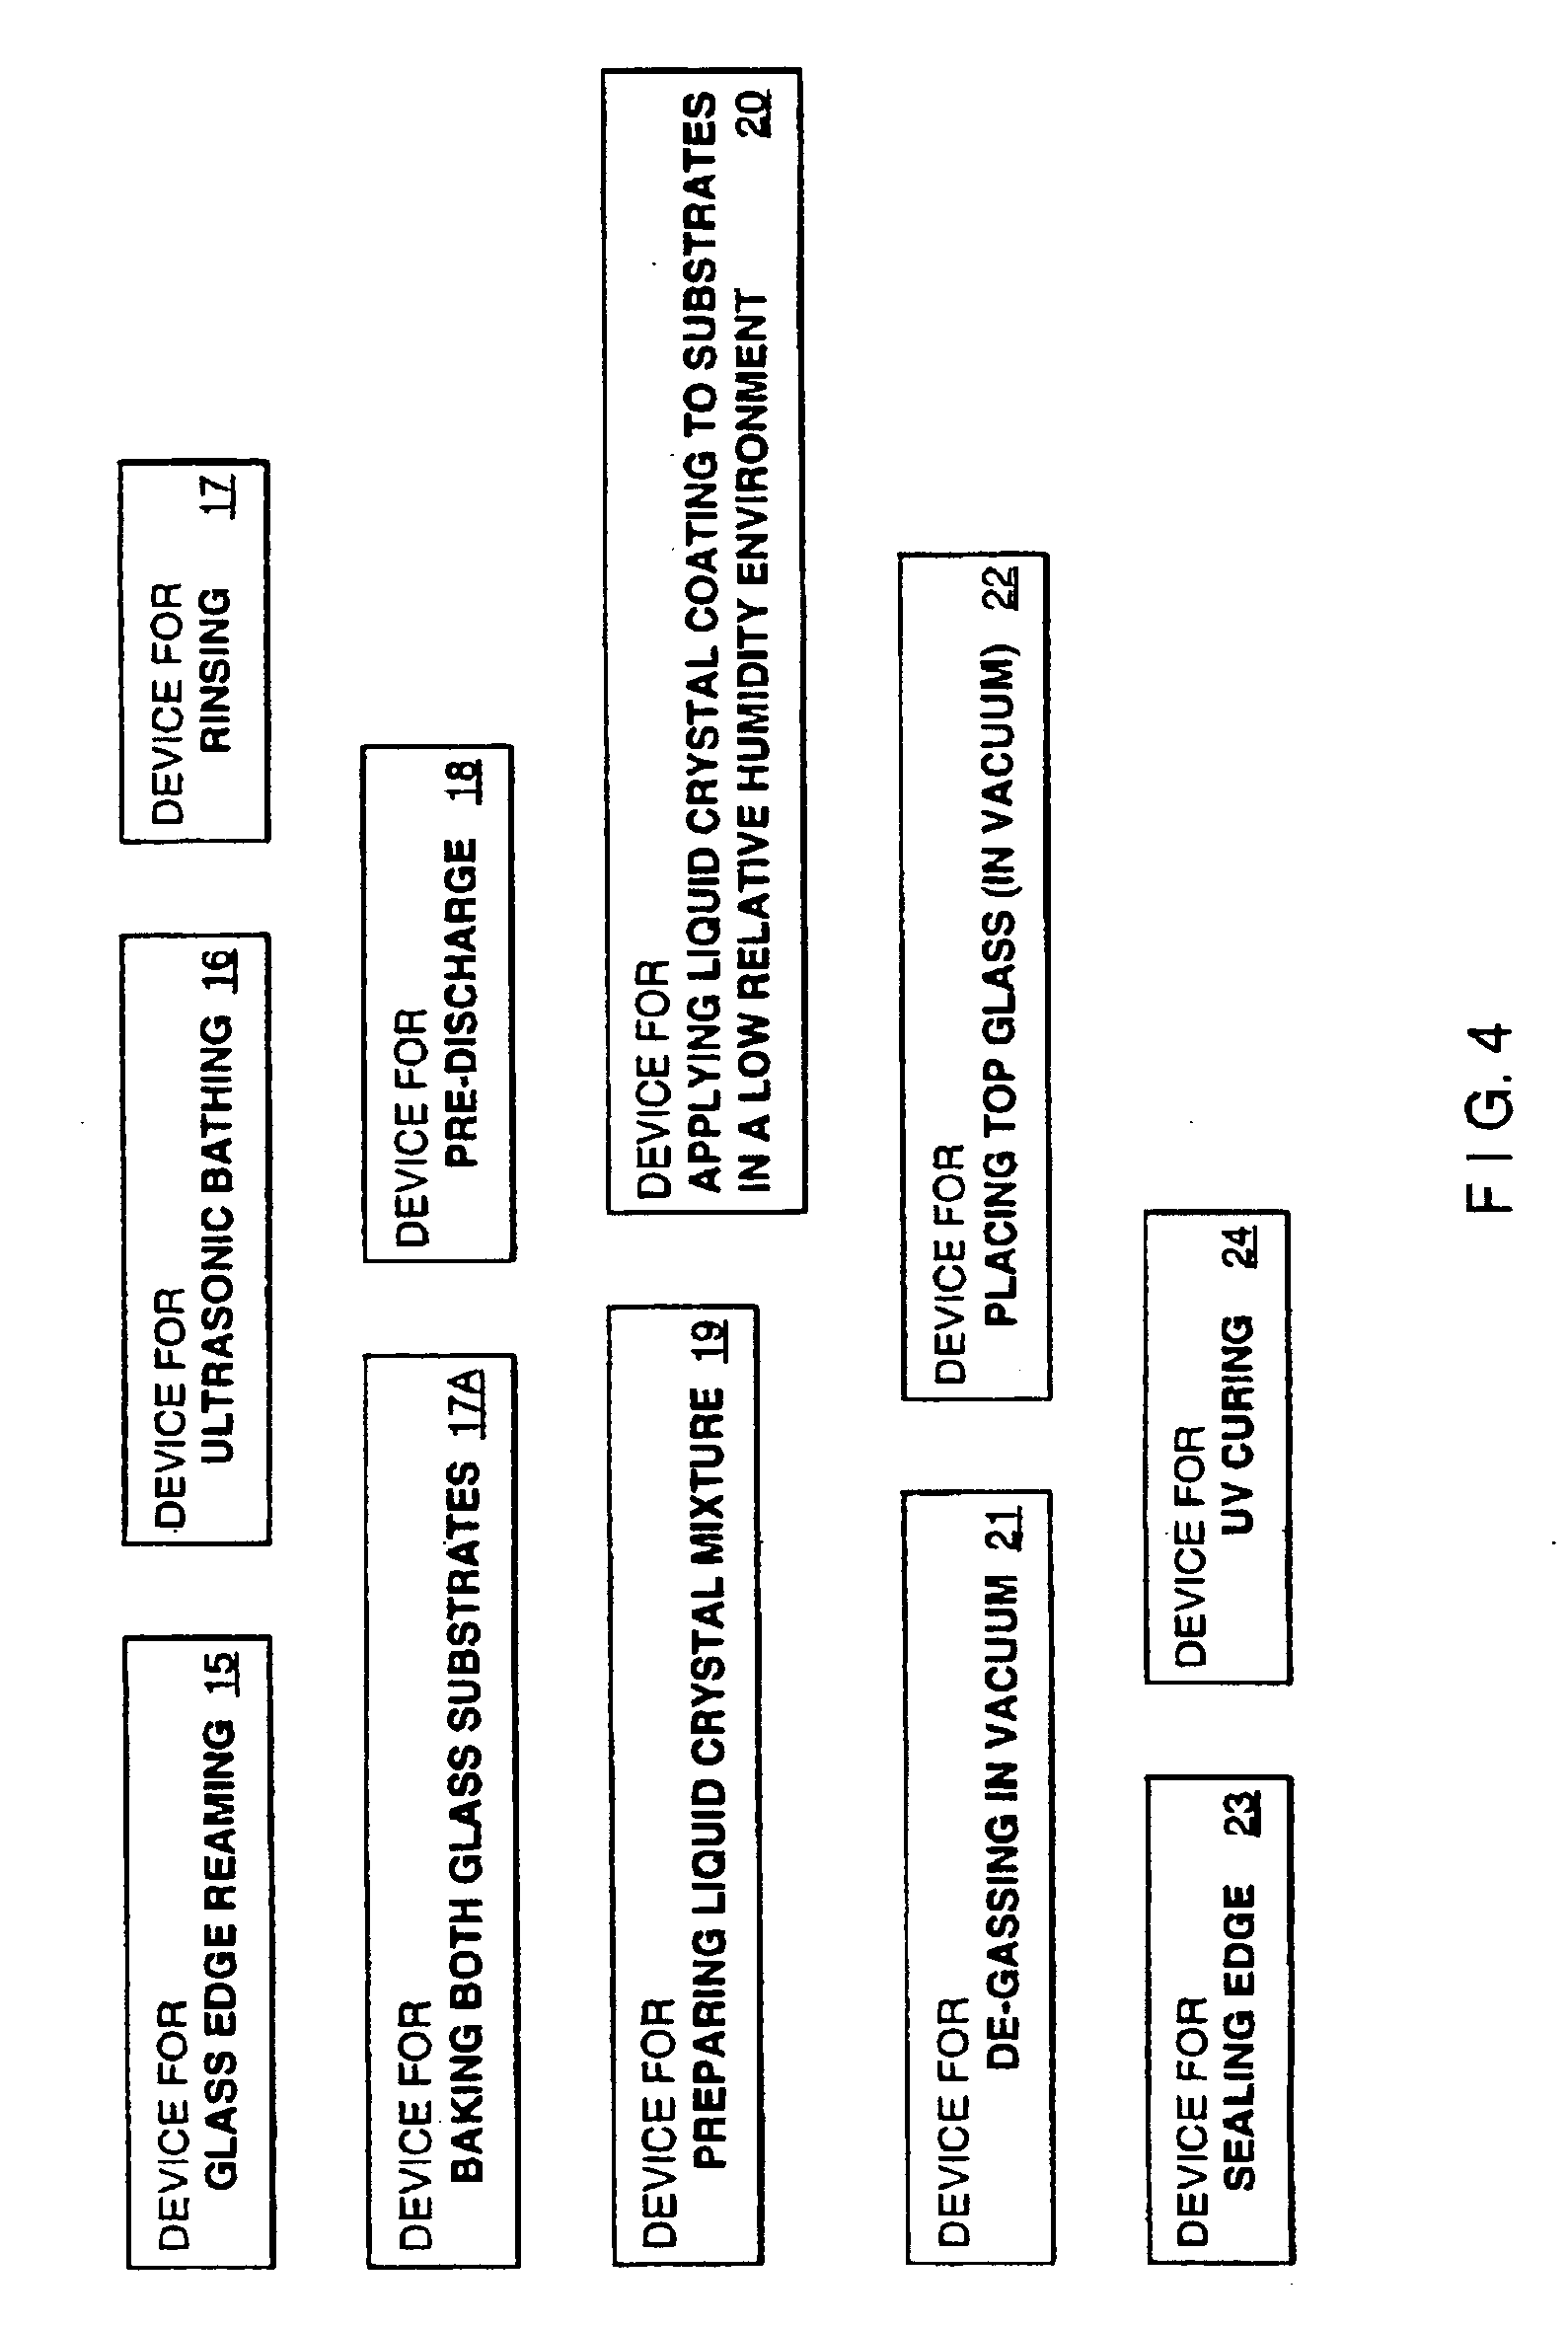 Electro-optical glazing structures having scattering and transparent modes of operation